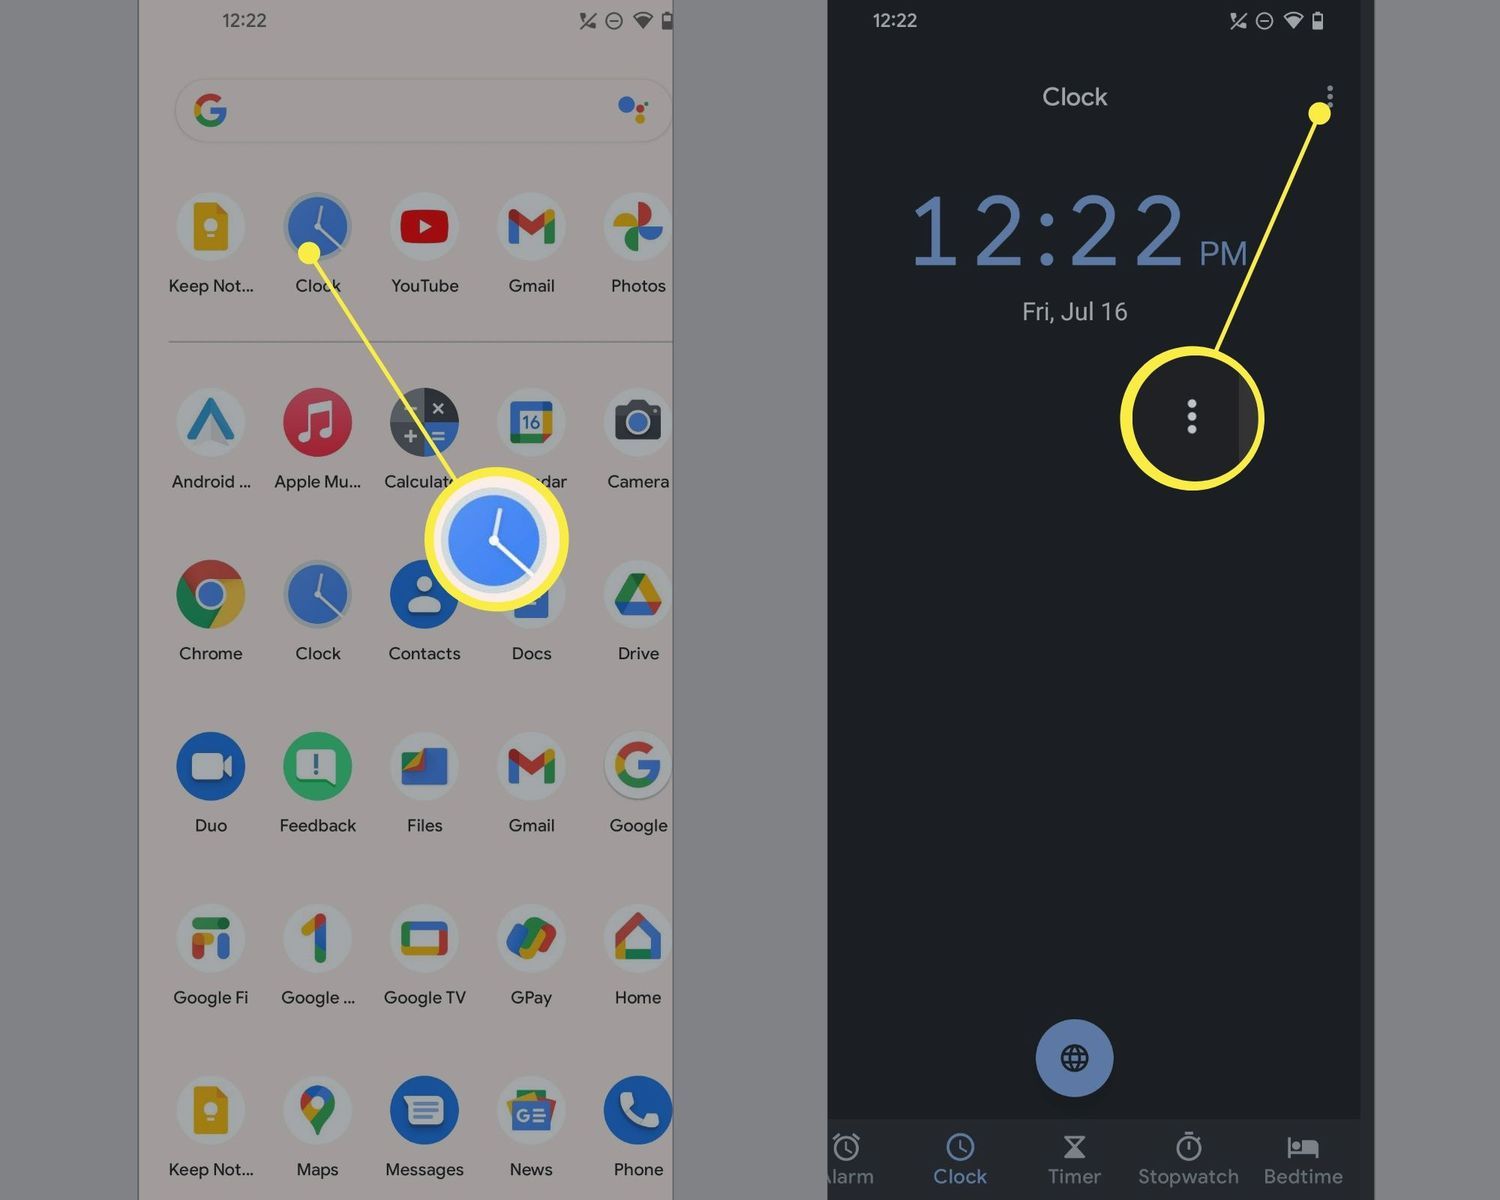 How To Change The Time On Android Phones